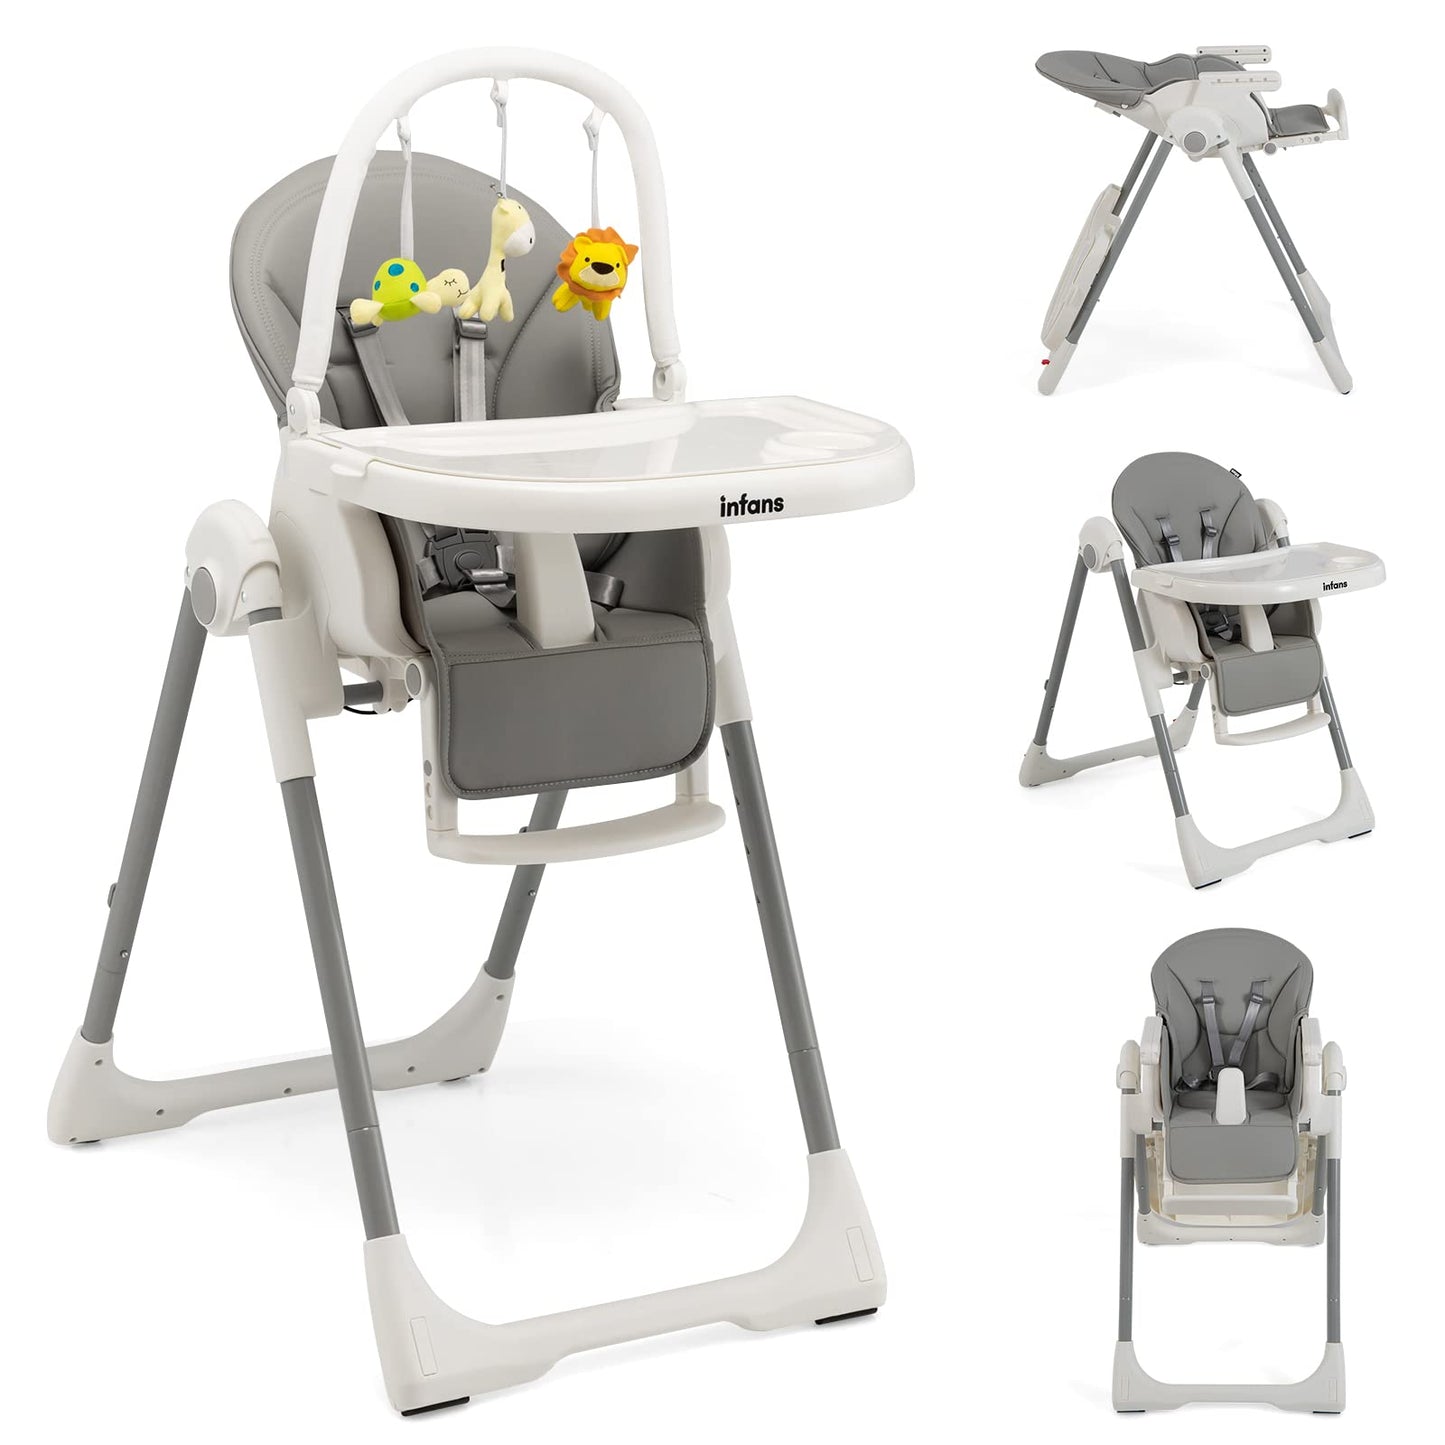 OLAKIDS High Chair for Babies and Toddlers, Foldable Highchair with 7 Different Heights 4 Reclining Backrest Seat 3 Setting Footrest OLAKIDS